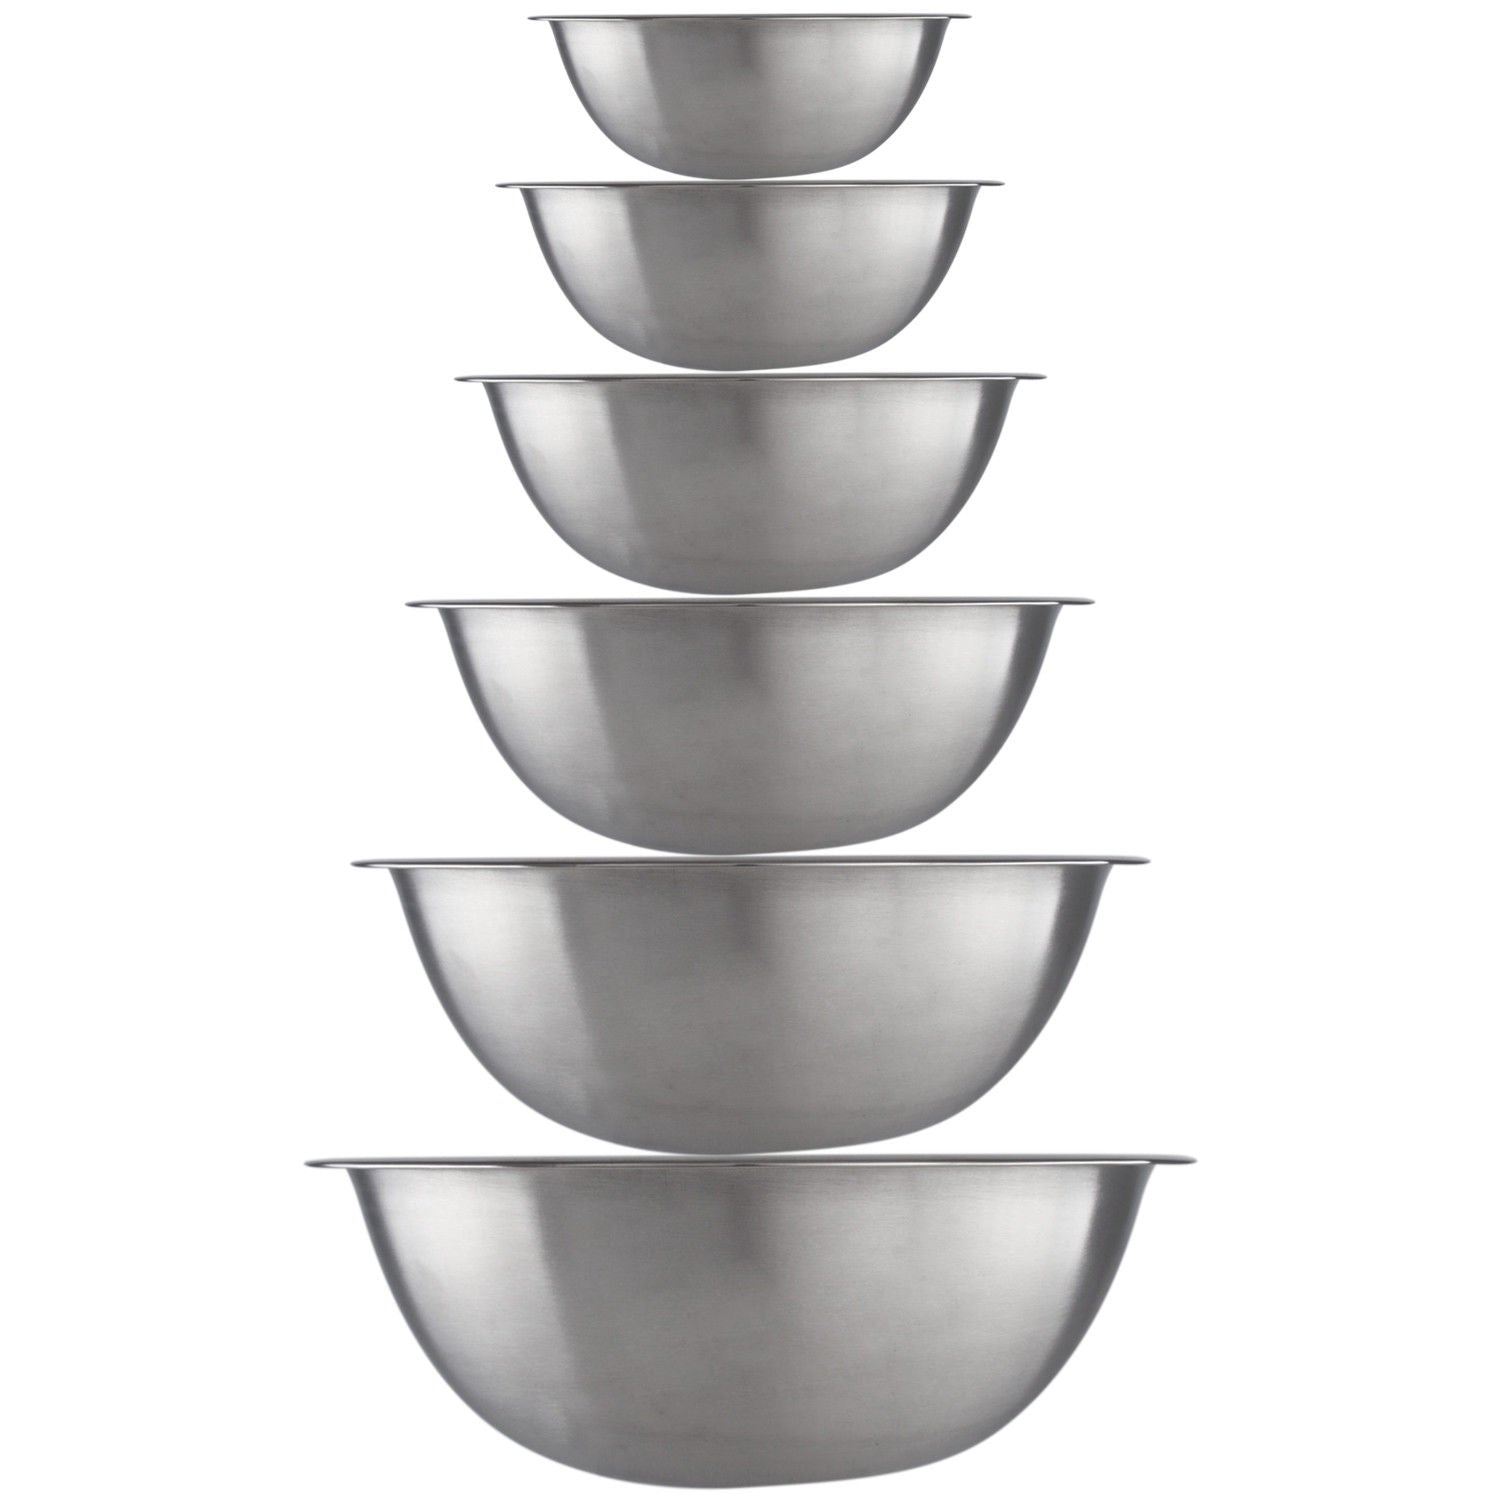 High Quality Large Stainless Steel 6 pcs Mixing Bowl Set - Free Measuring Spoons